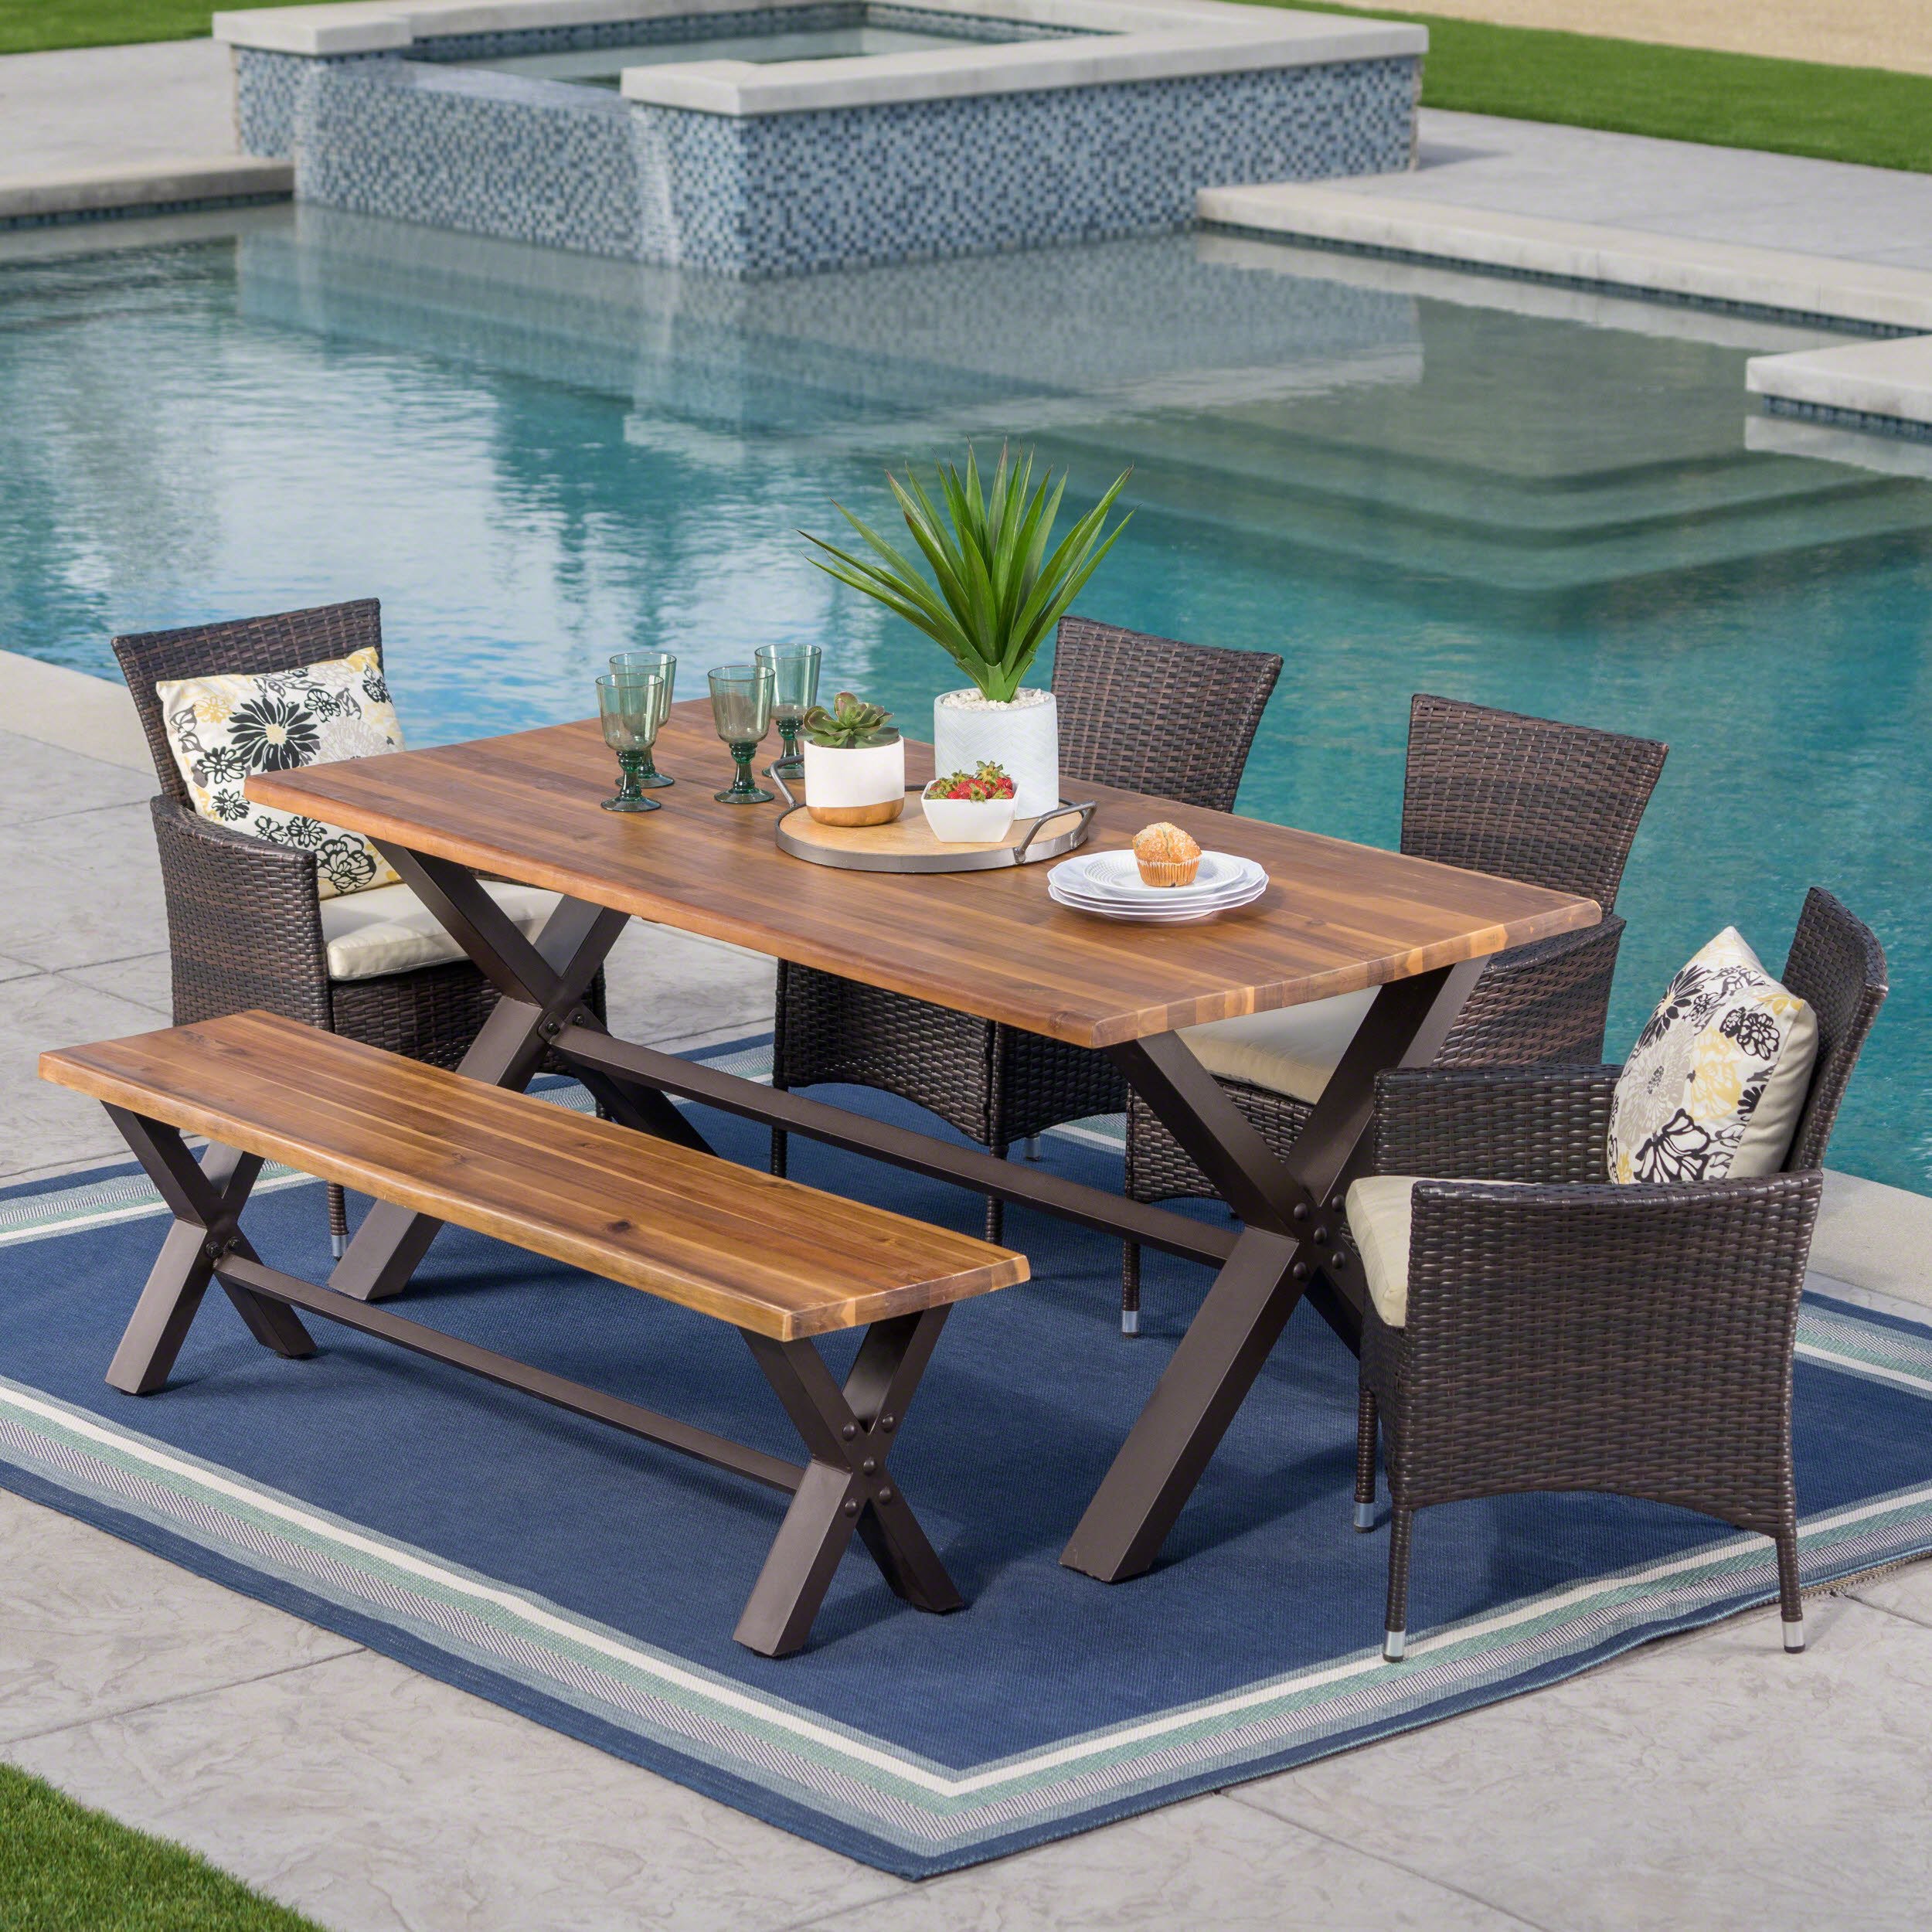 Buy Outdoor Dining Sets Online at Overstock | Our Best Patio Furniture Deals